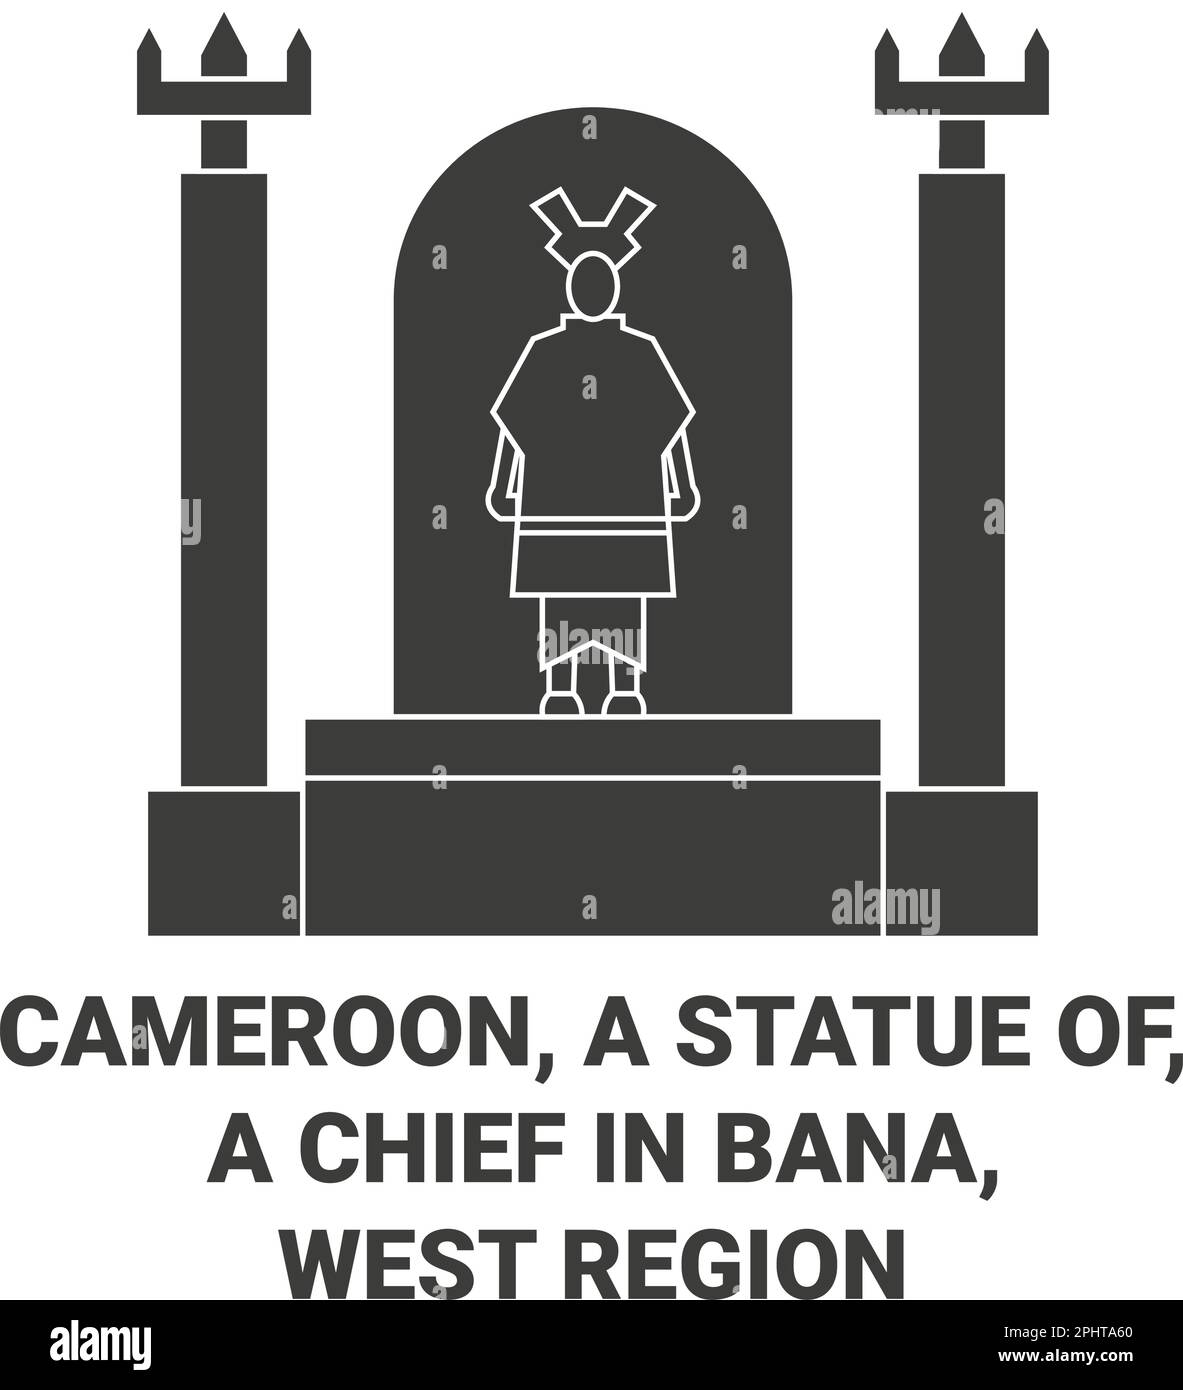 Cameroon, A Statue Of, A Chief In Bana, West Region. travel landmark vector illustration Stock Vector